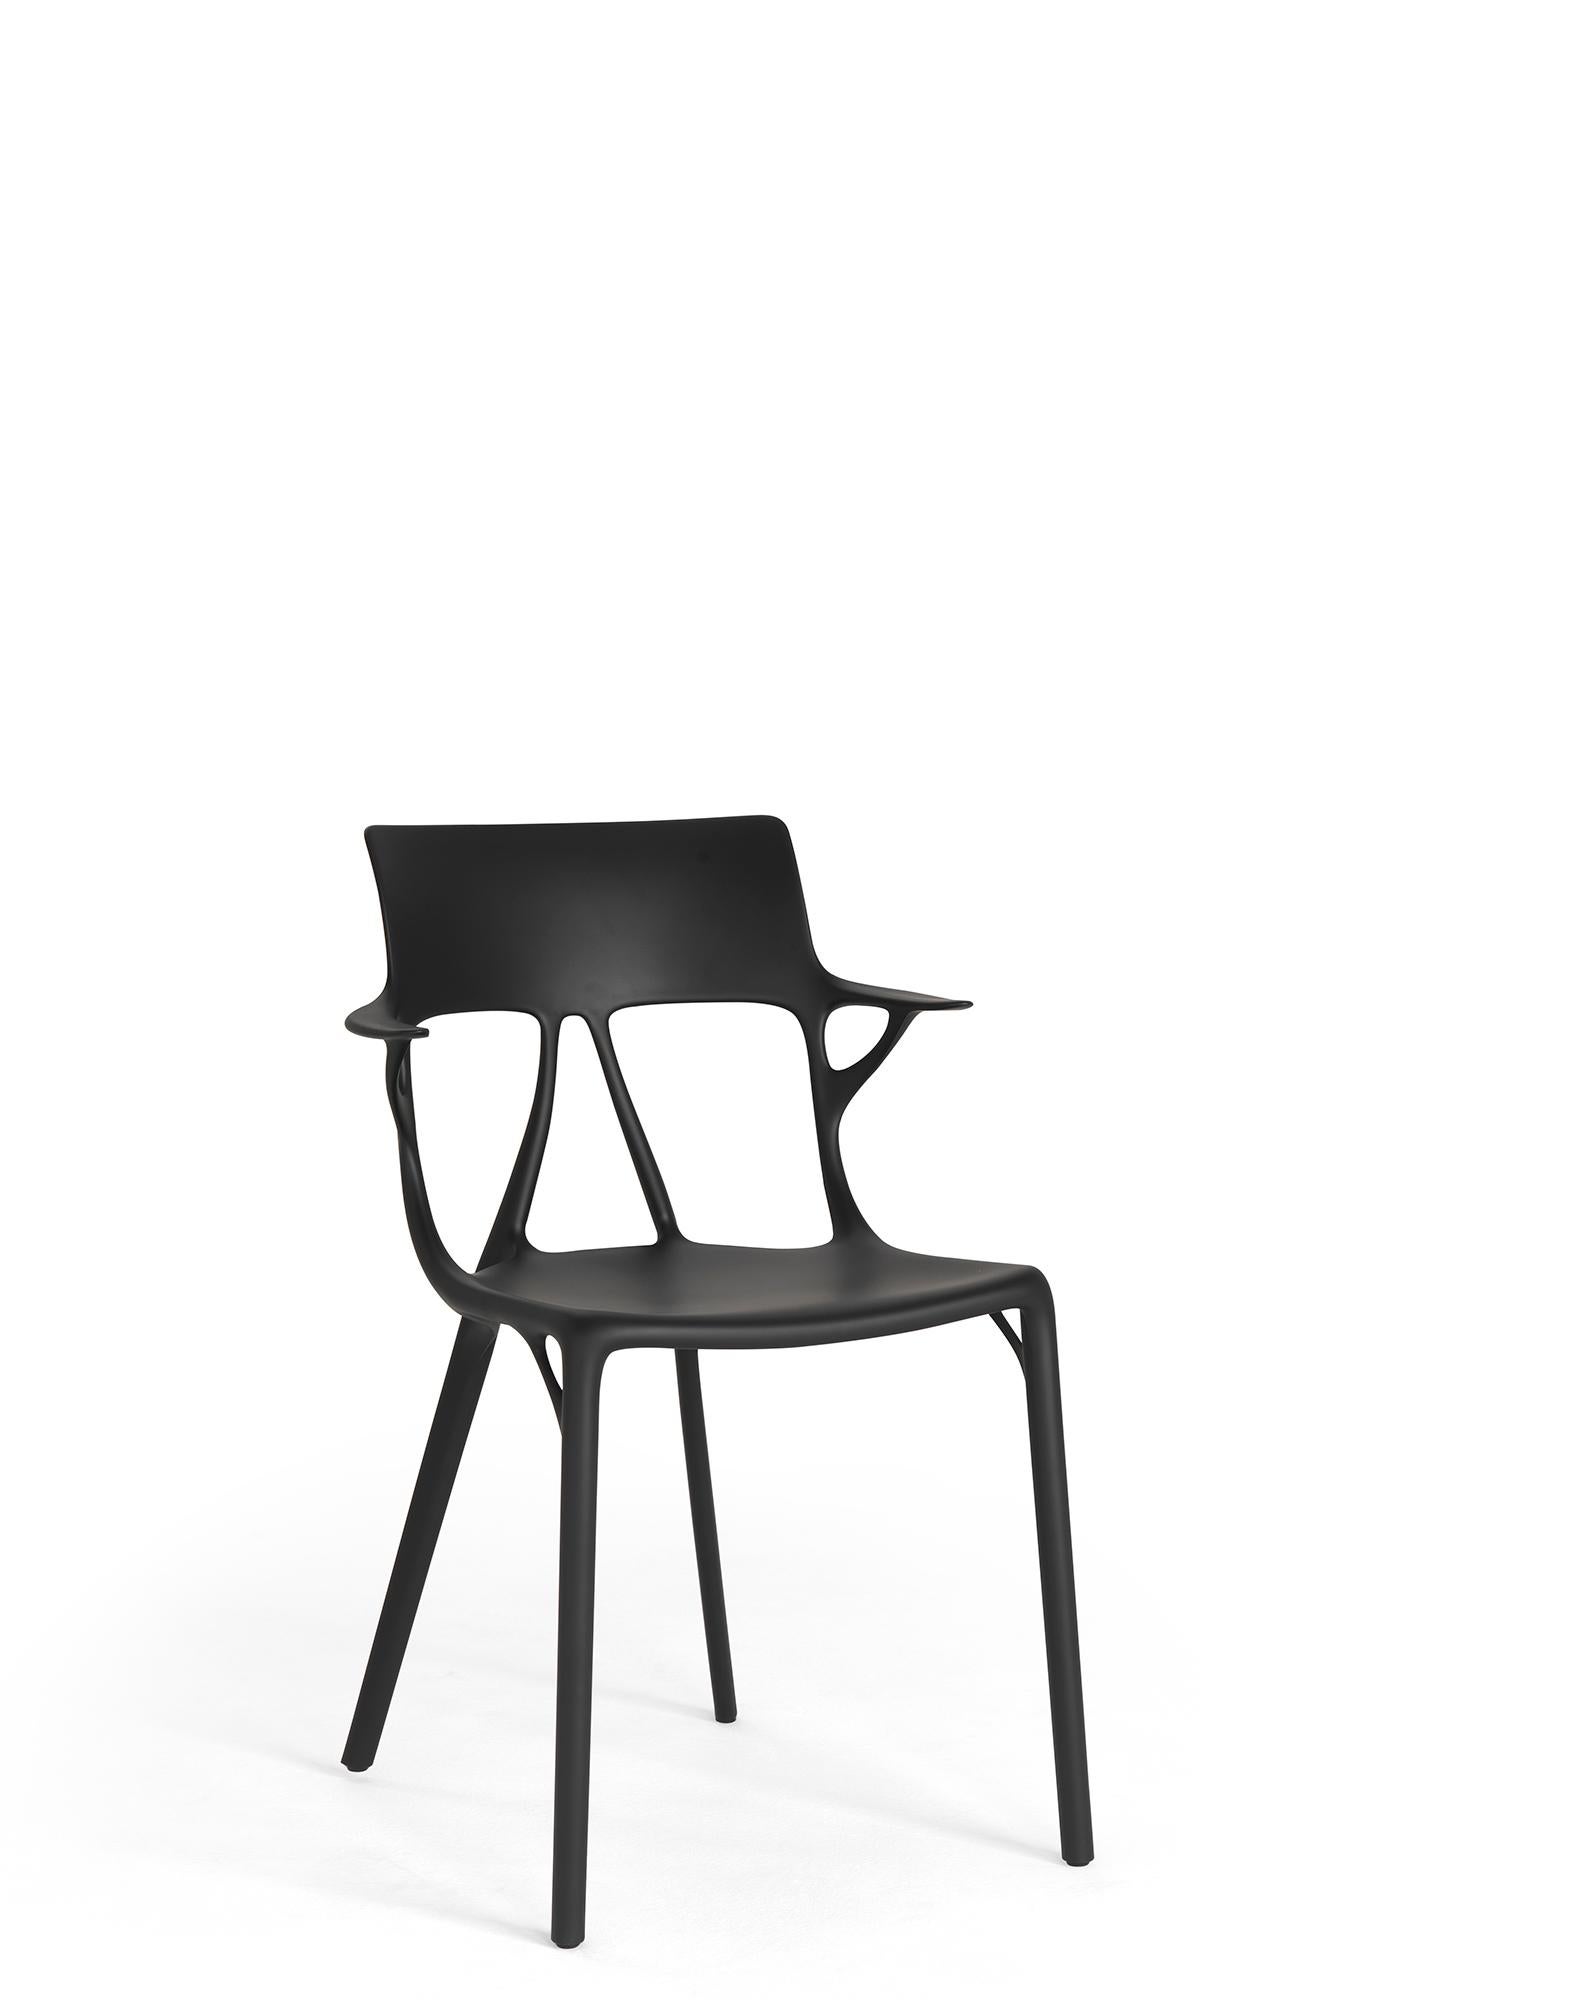 a.i. chair kartell